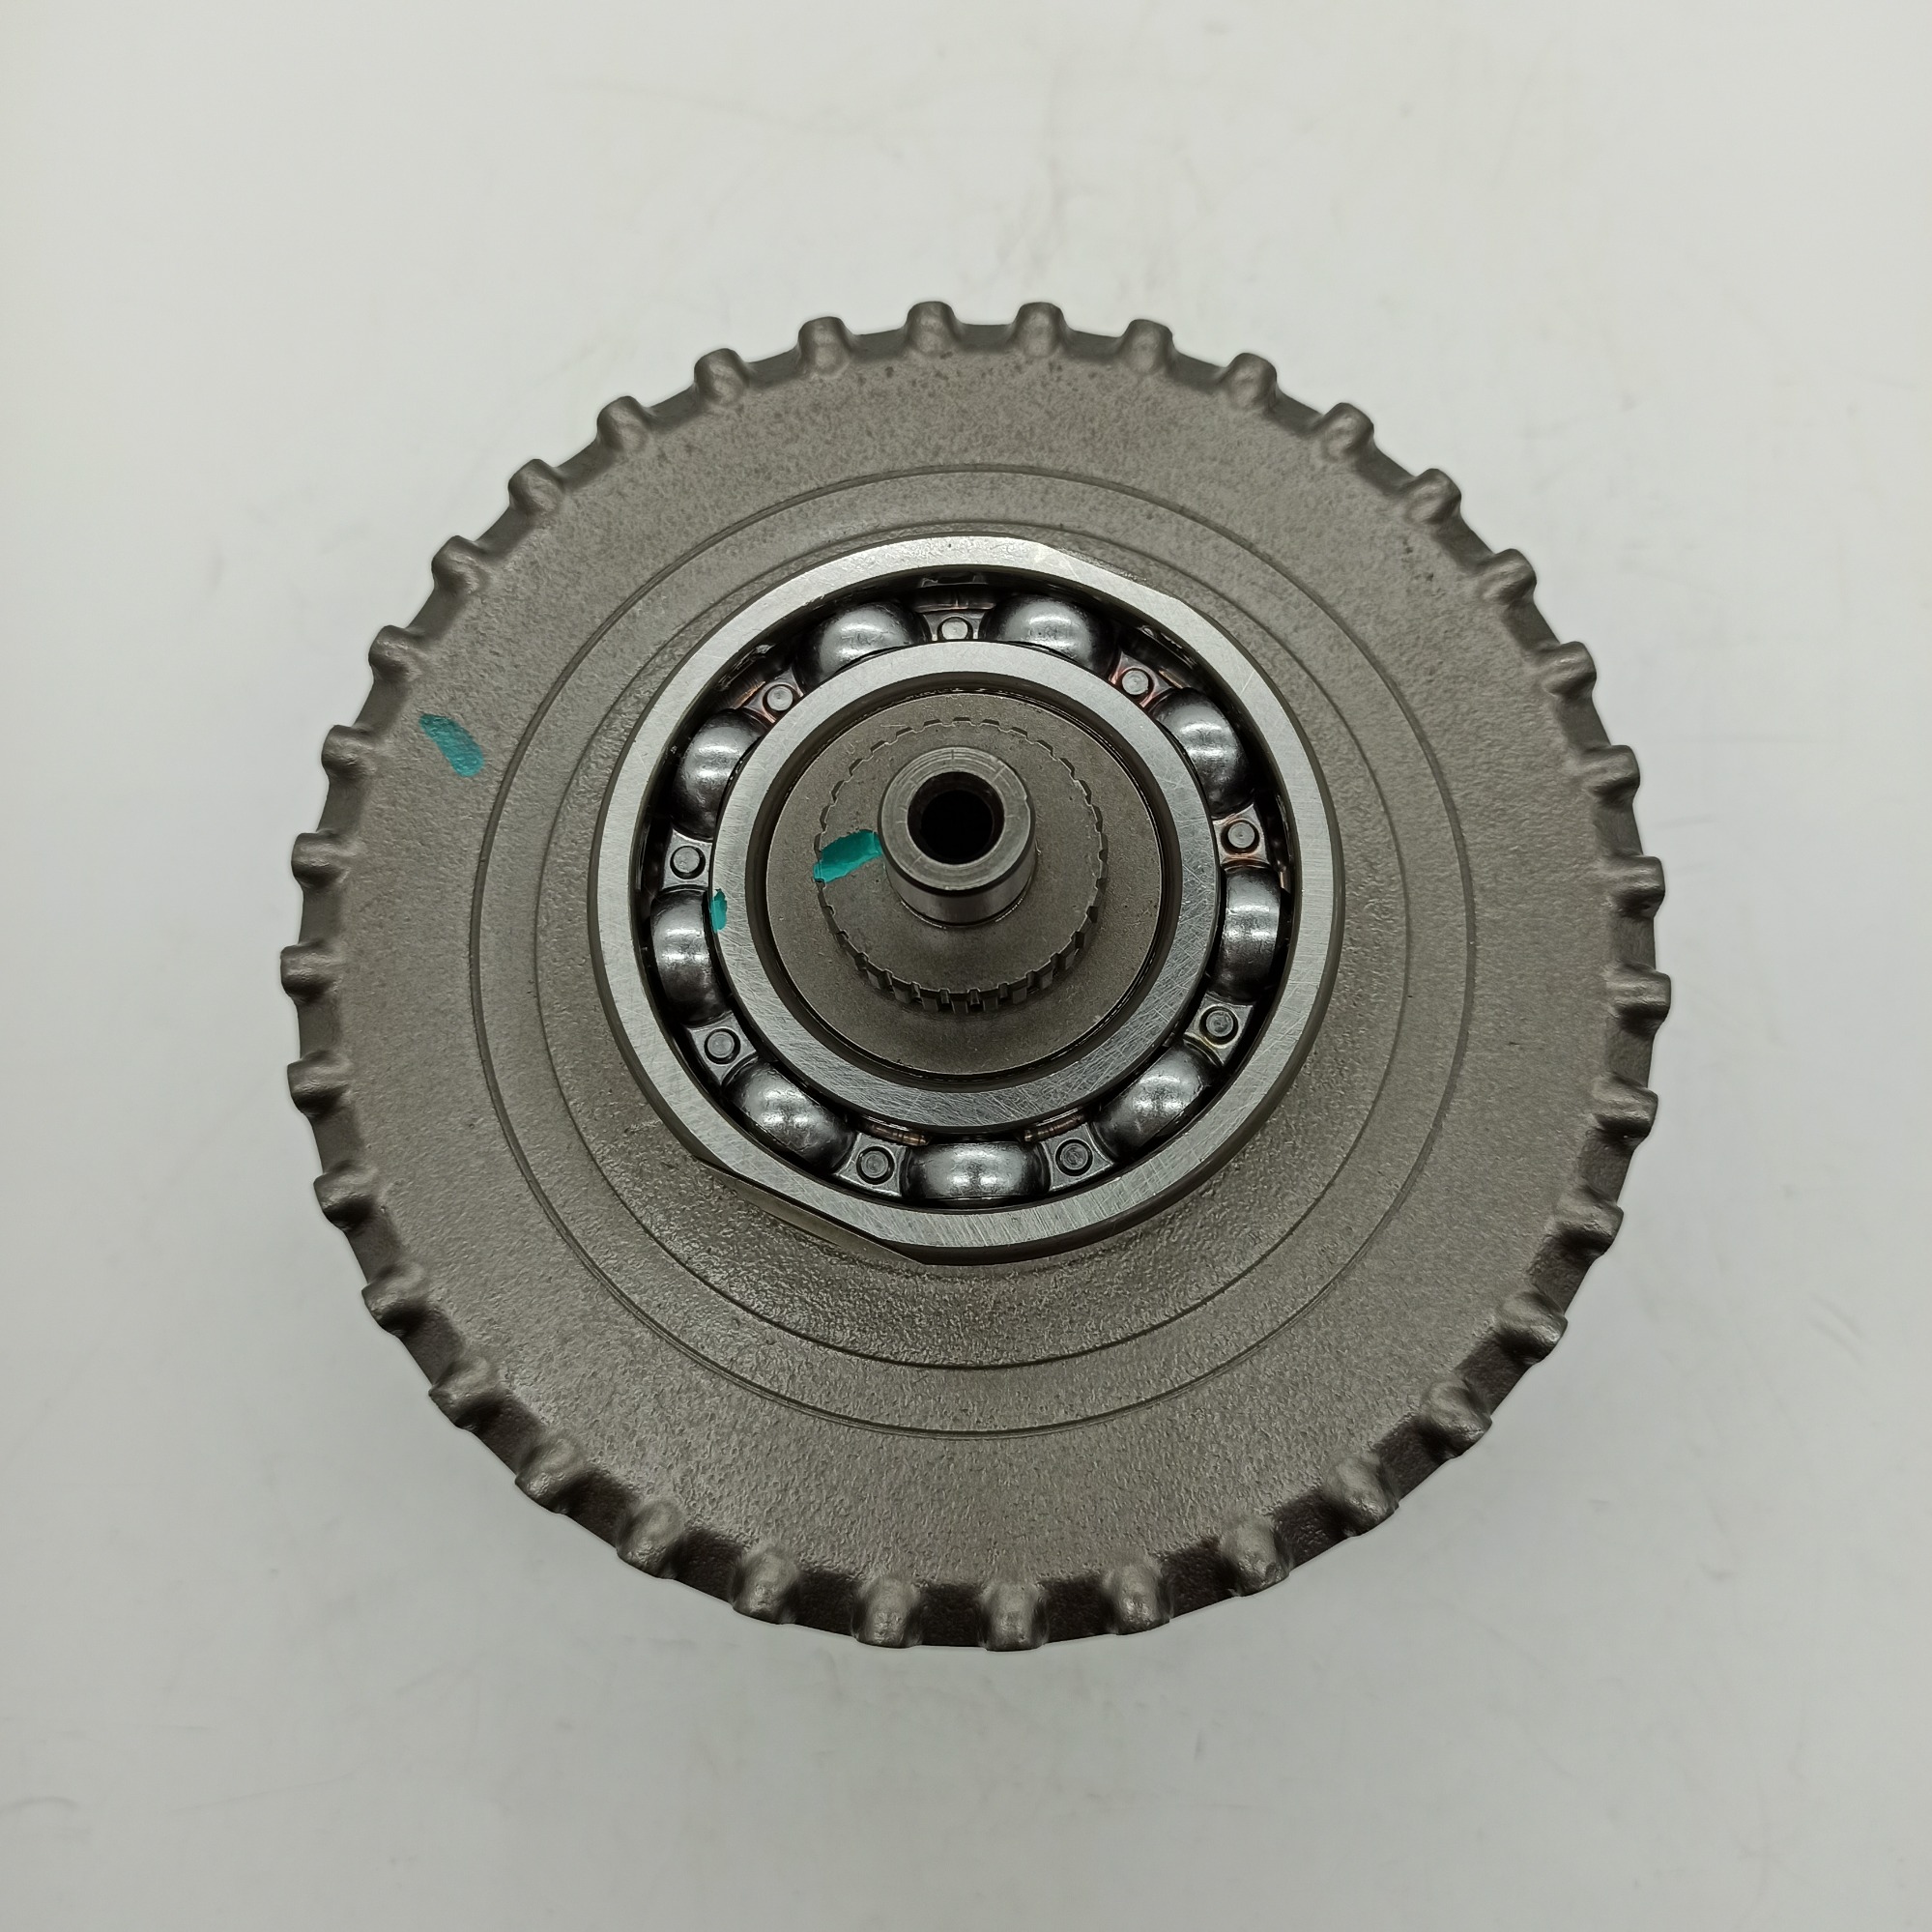 019CHA Automatic Transmission primary pulley OEM 019CHA-1502510